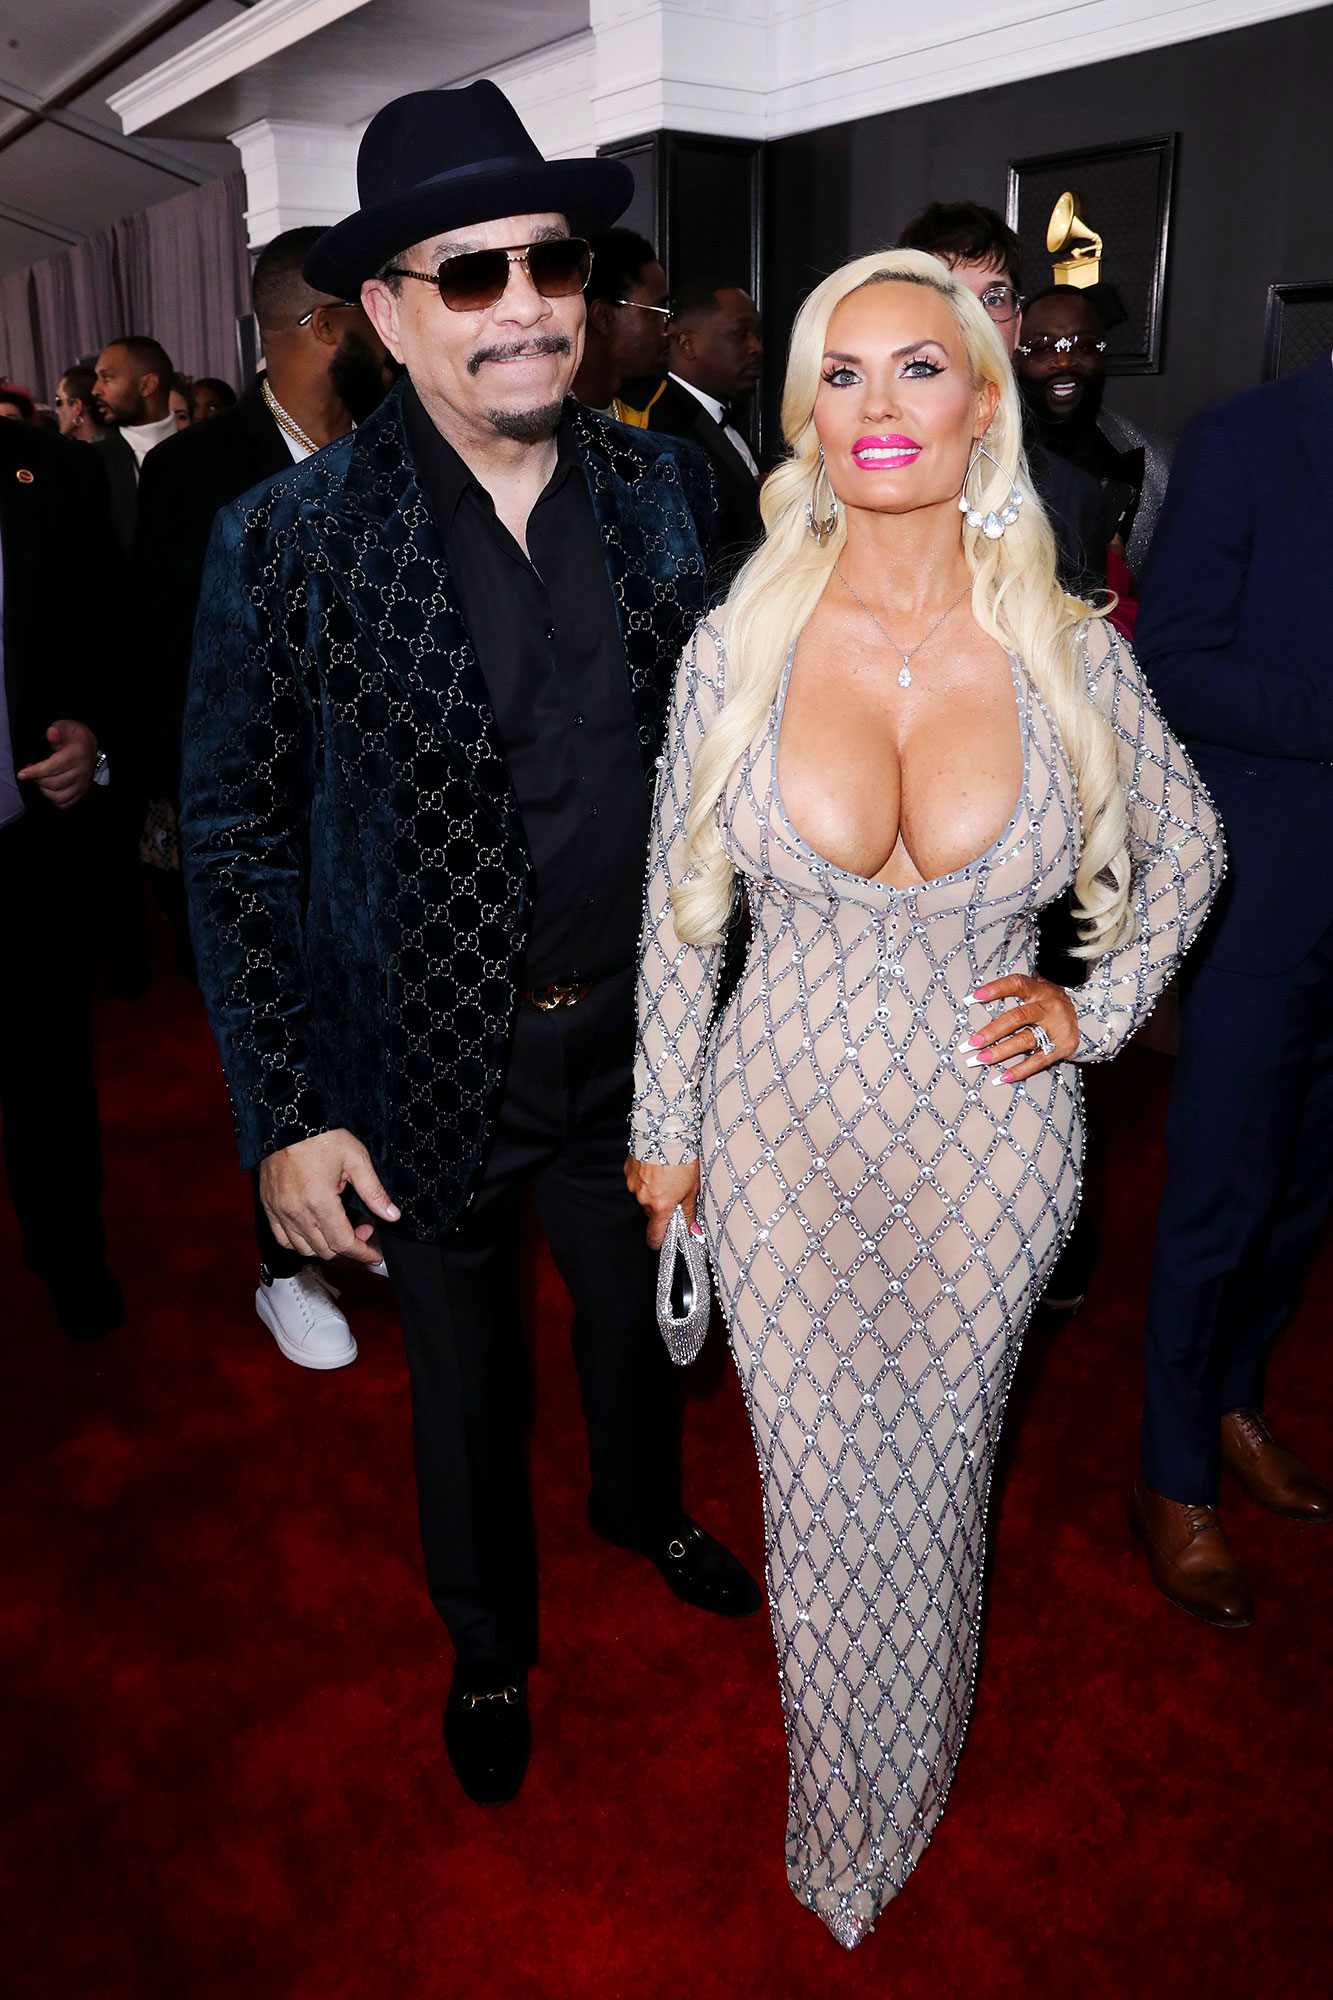 IceT Slams Troll Claiming Coco Austin's Dress Was ‘3 Sizes Too Small